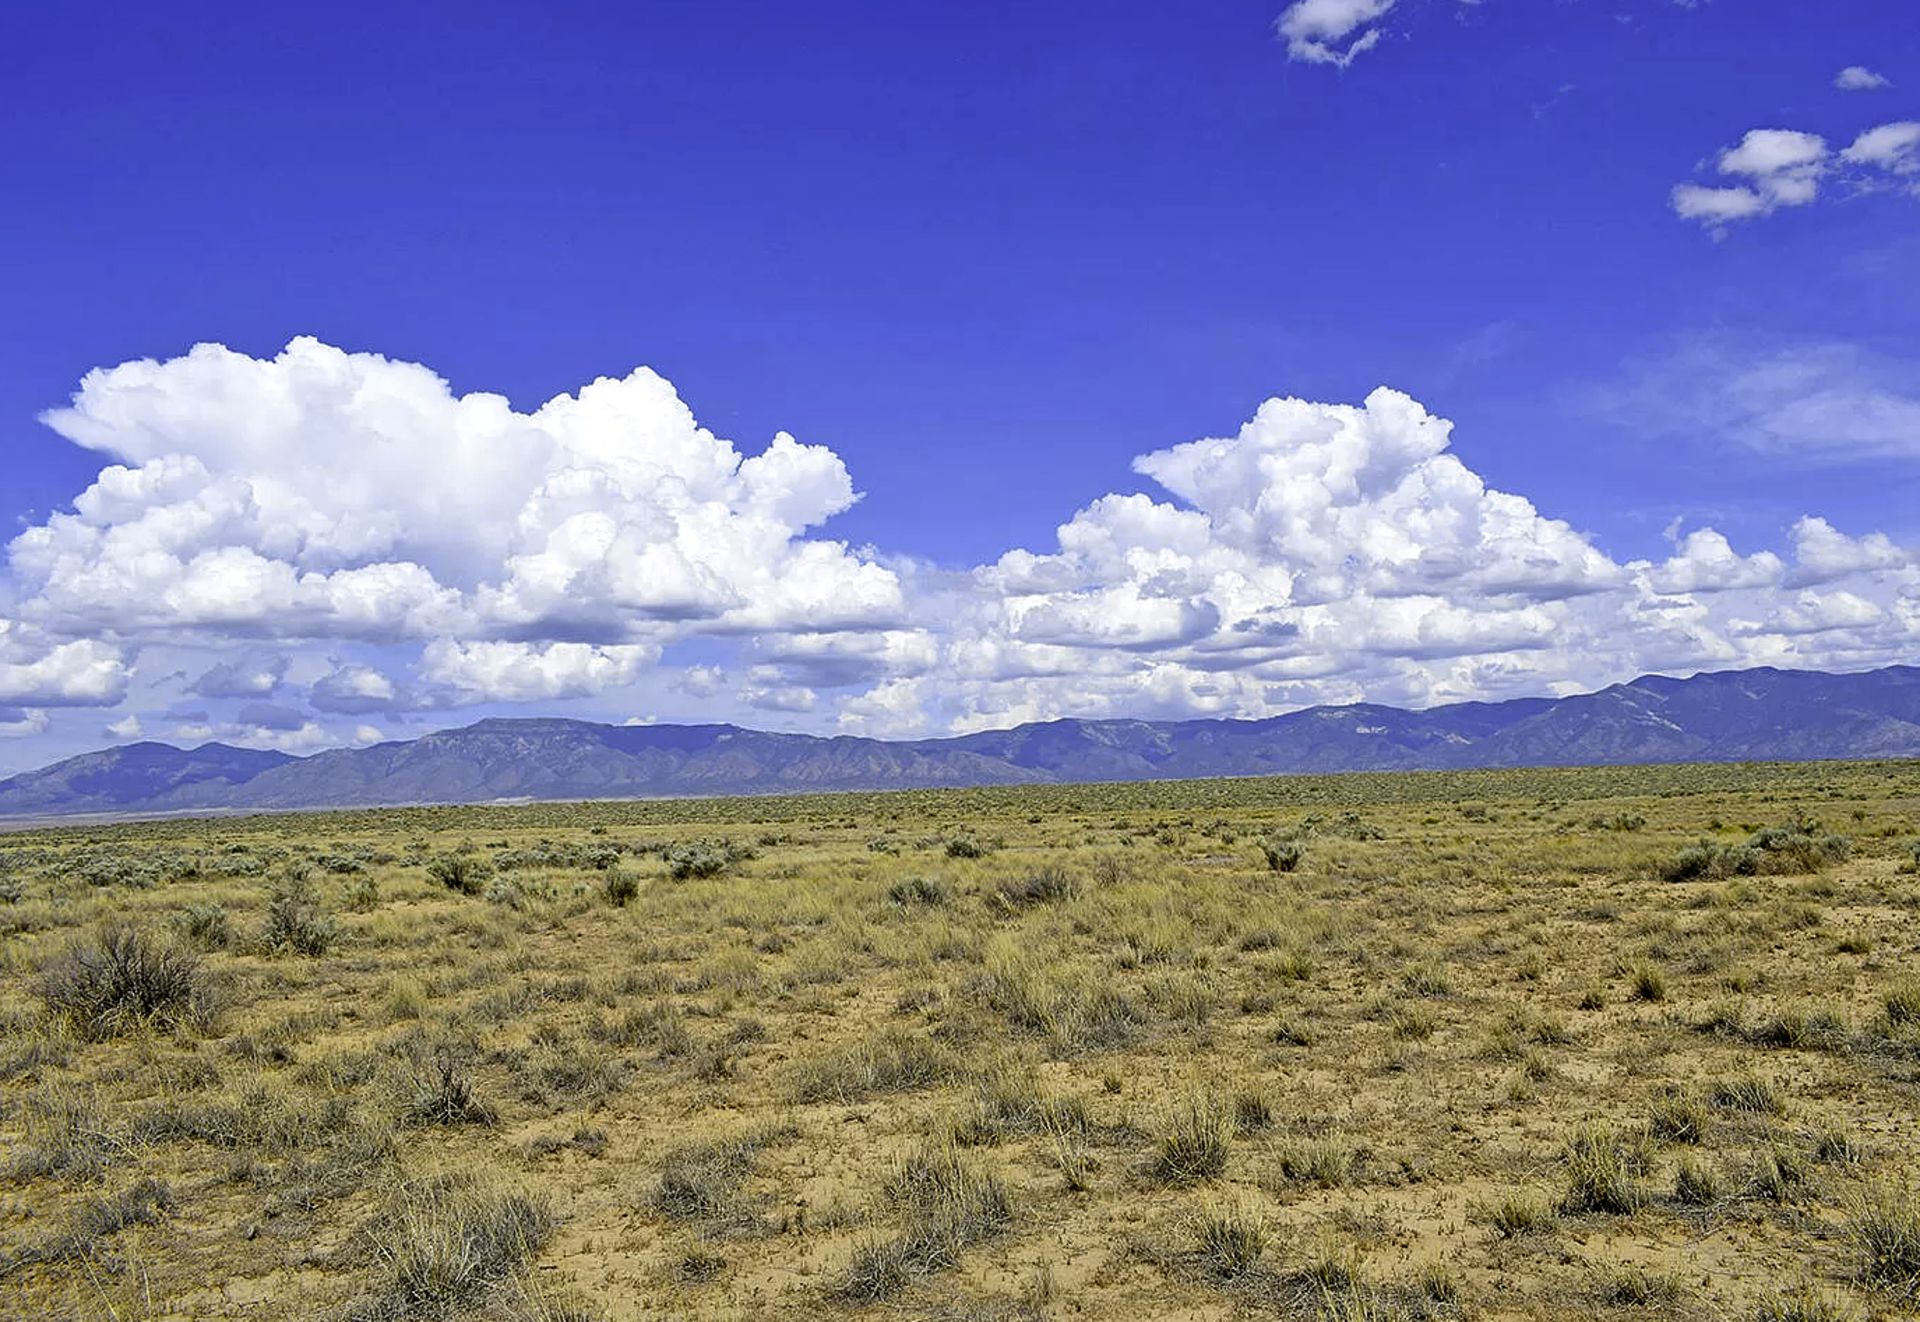 Expand Your Portfolio: 10 Lots in New Mexico! BIDDING IS PER LOT! - Image 3 of 10